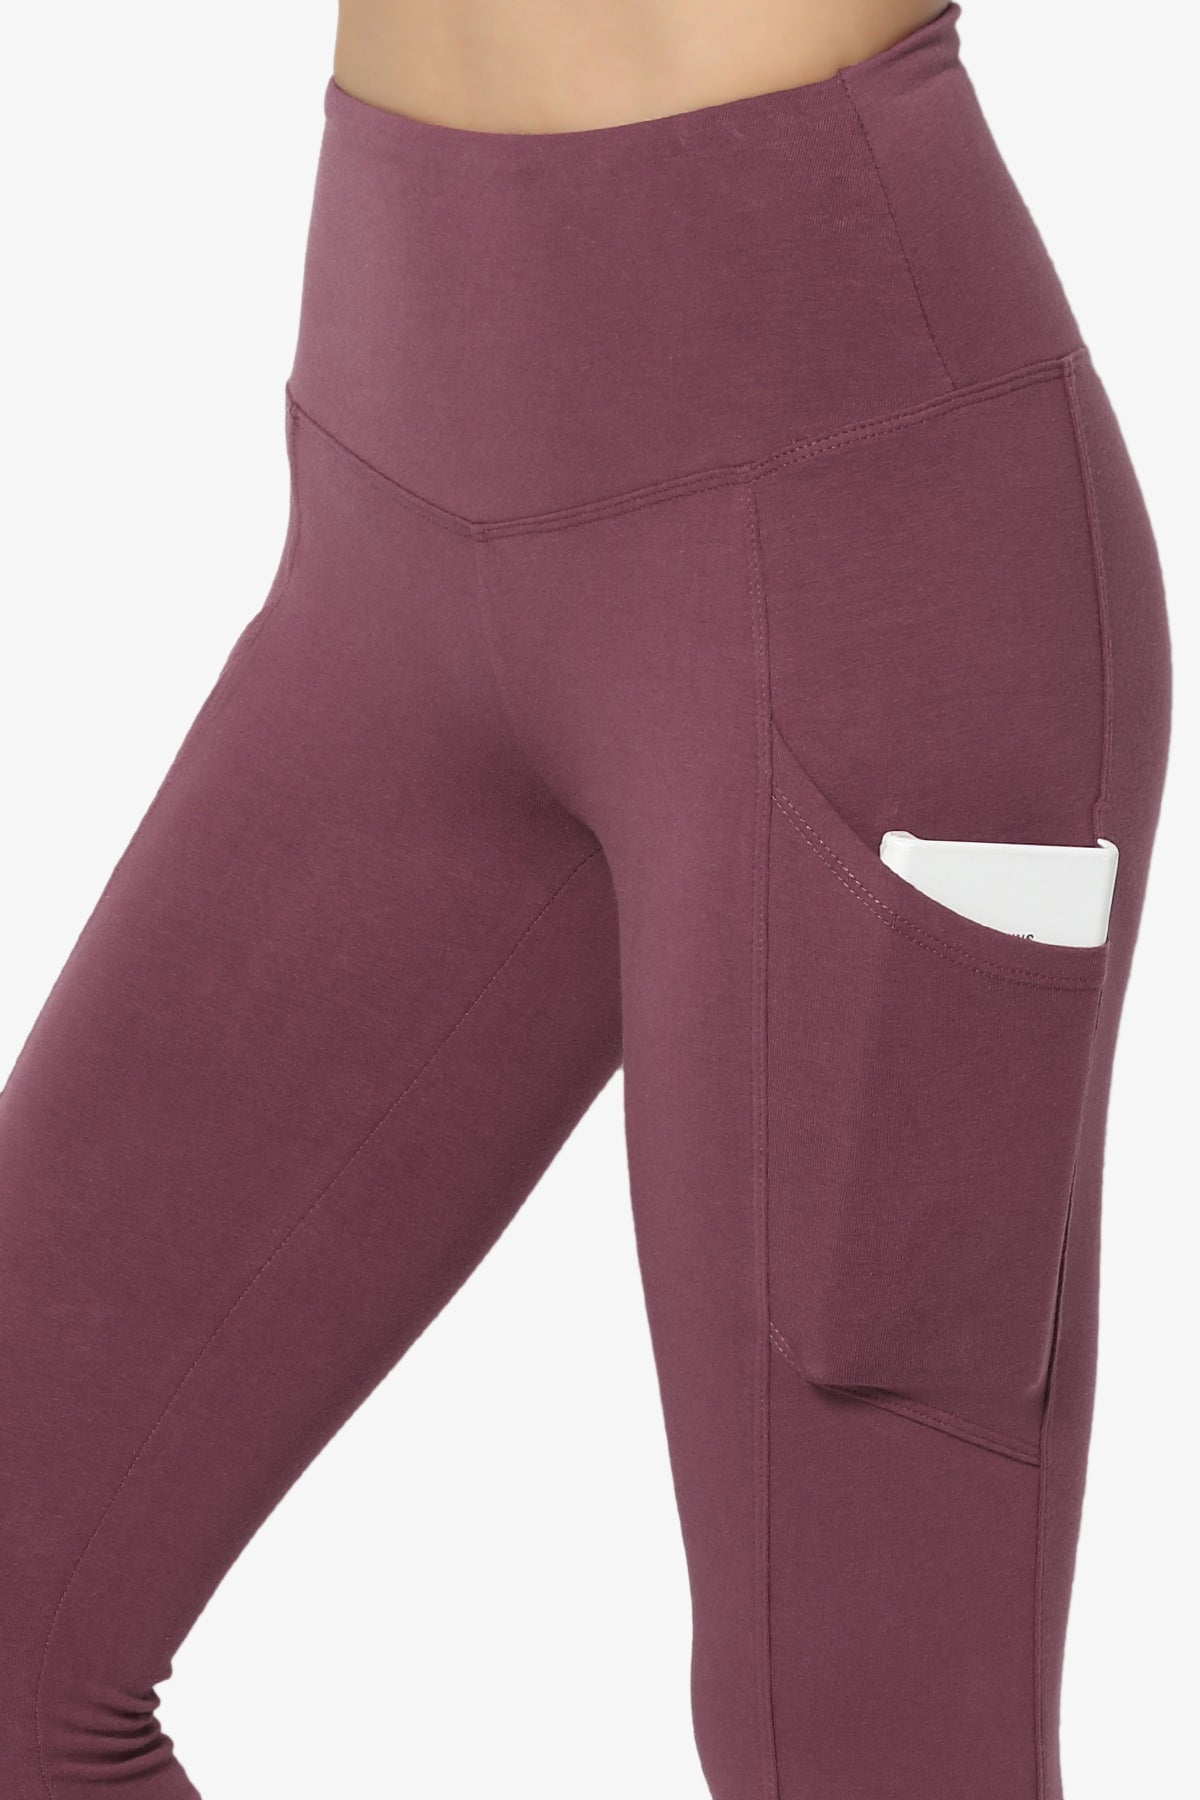 Ansley Luxe Cotton Leggings with Pockets DUSTY PLUM_5